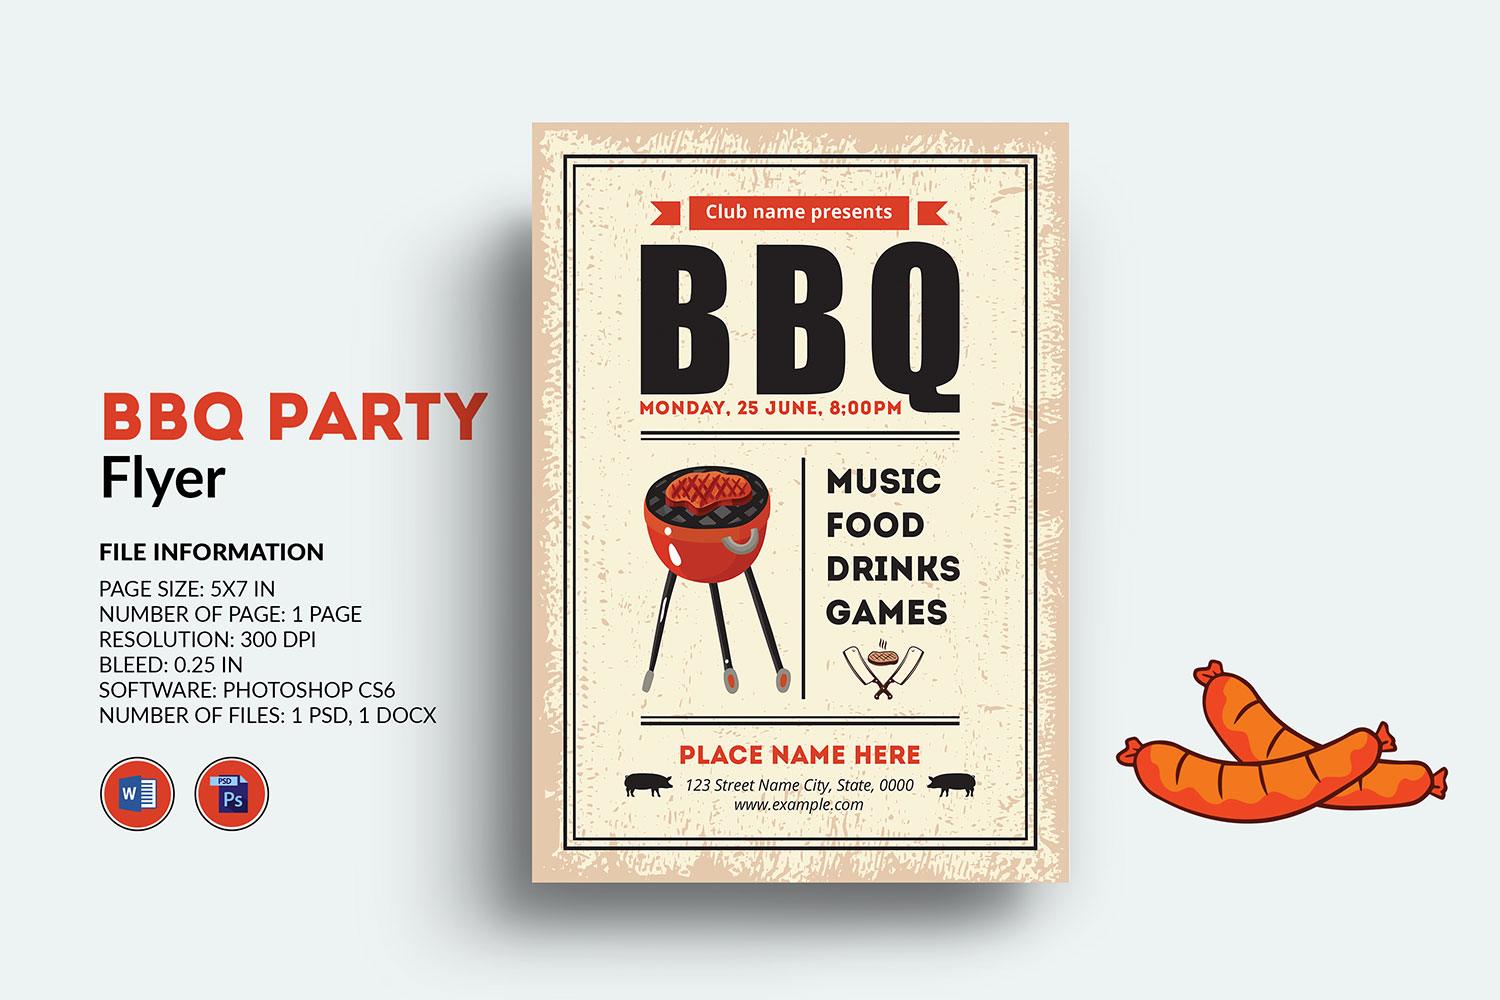 Barbecue Flyer / BBQ Party Flyer Template. Canva, word and Photoshop